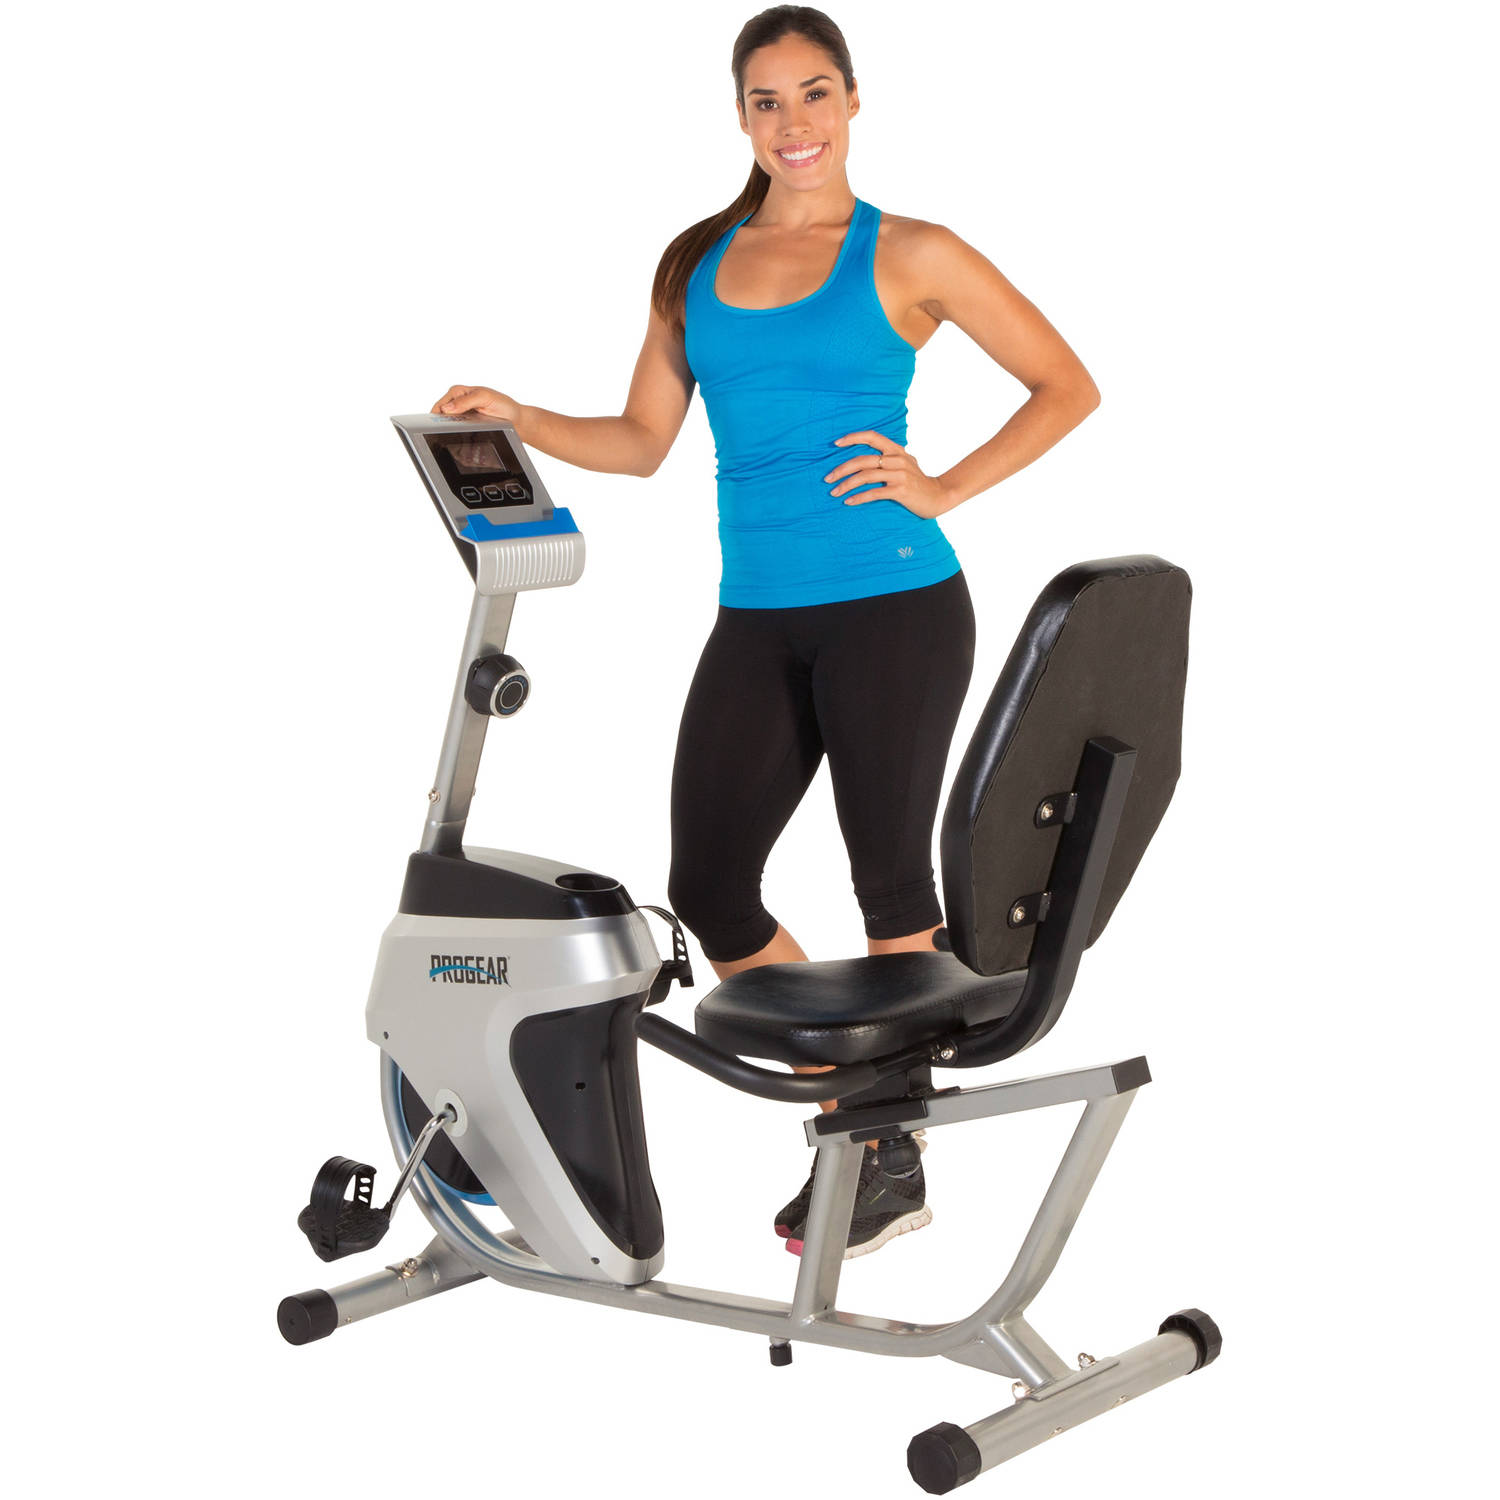 ProGear 555LXT Magnetic Tension Recumbent Exercise Bike with Workout Goal Setting Computer - image 1 of 17